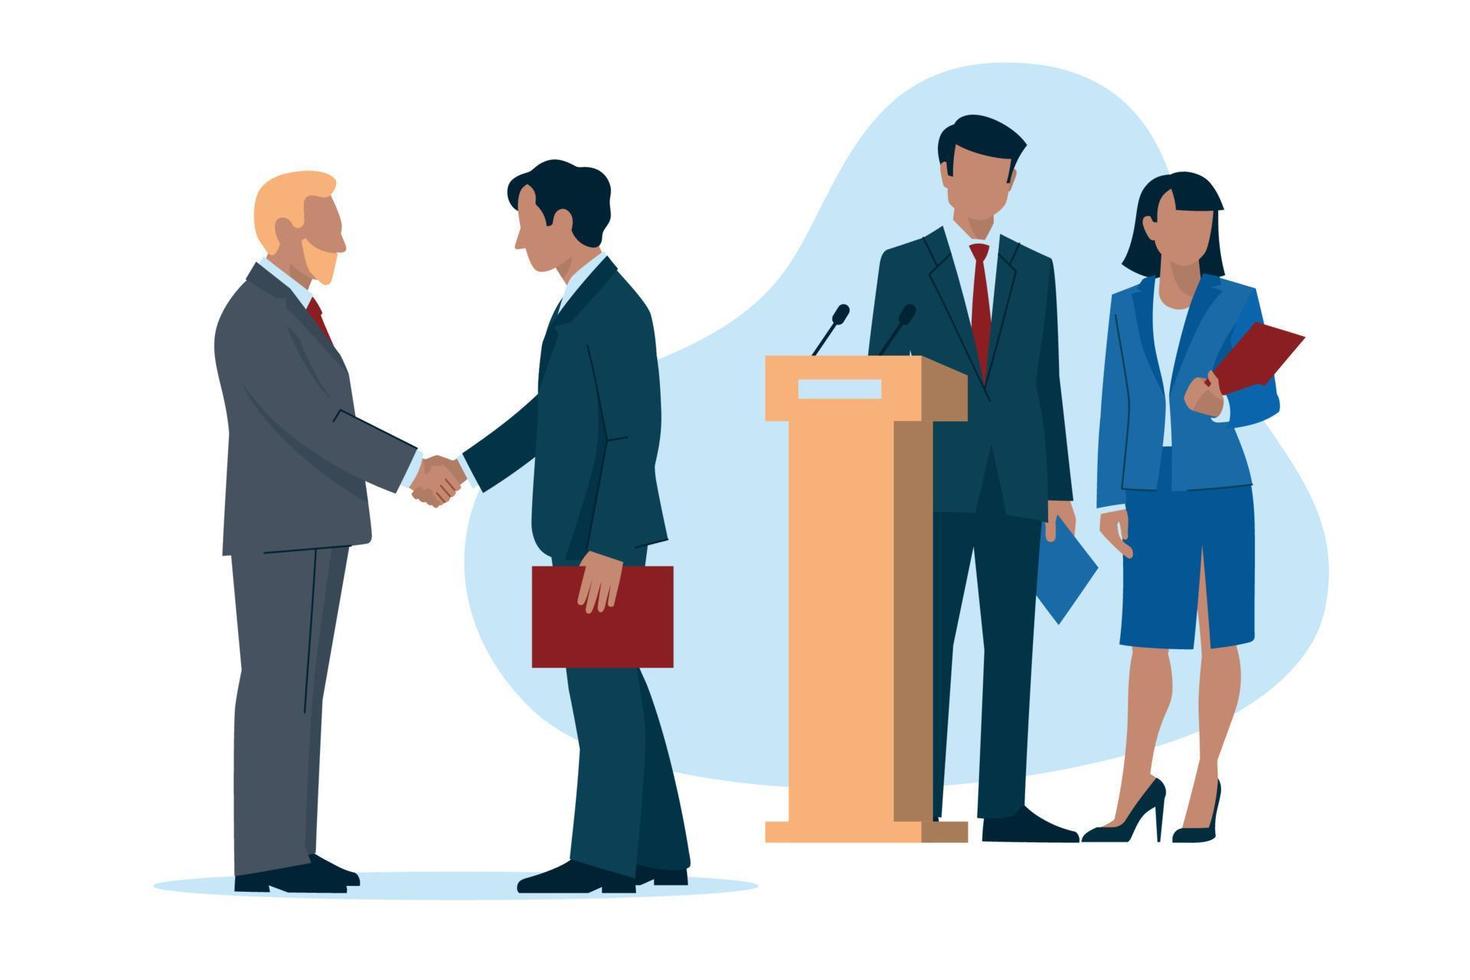 Business people. Man and woman in business suits with a folder. Public speaking from the podium. Men greet each other with a handshake. Official event. Vector image.